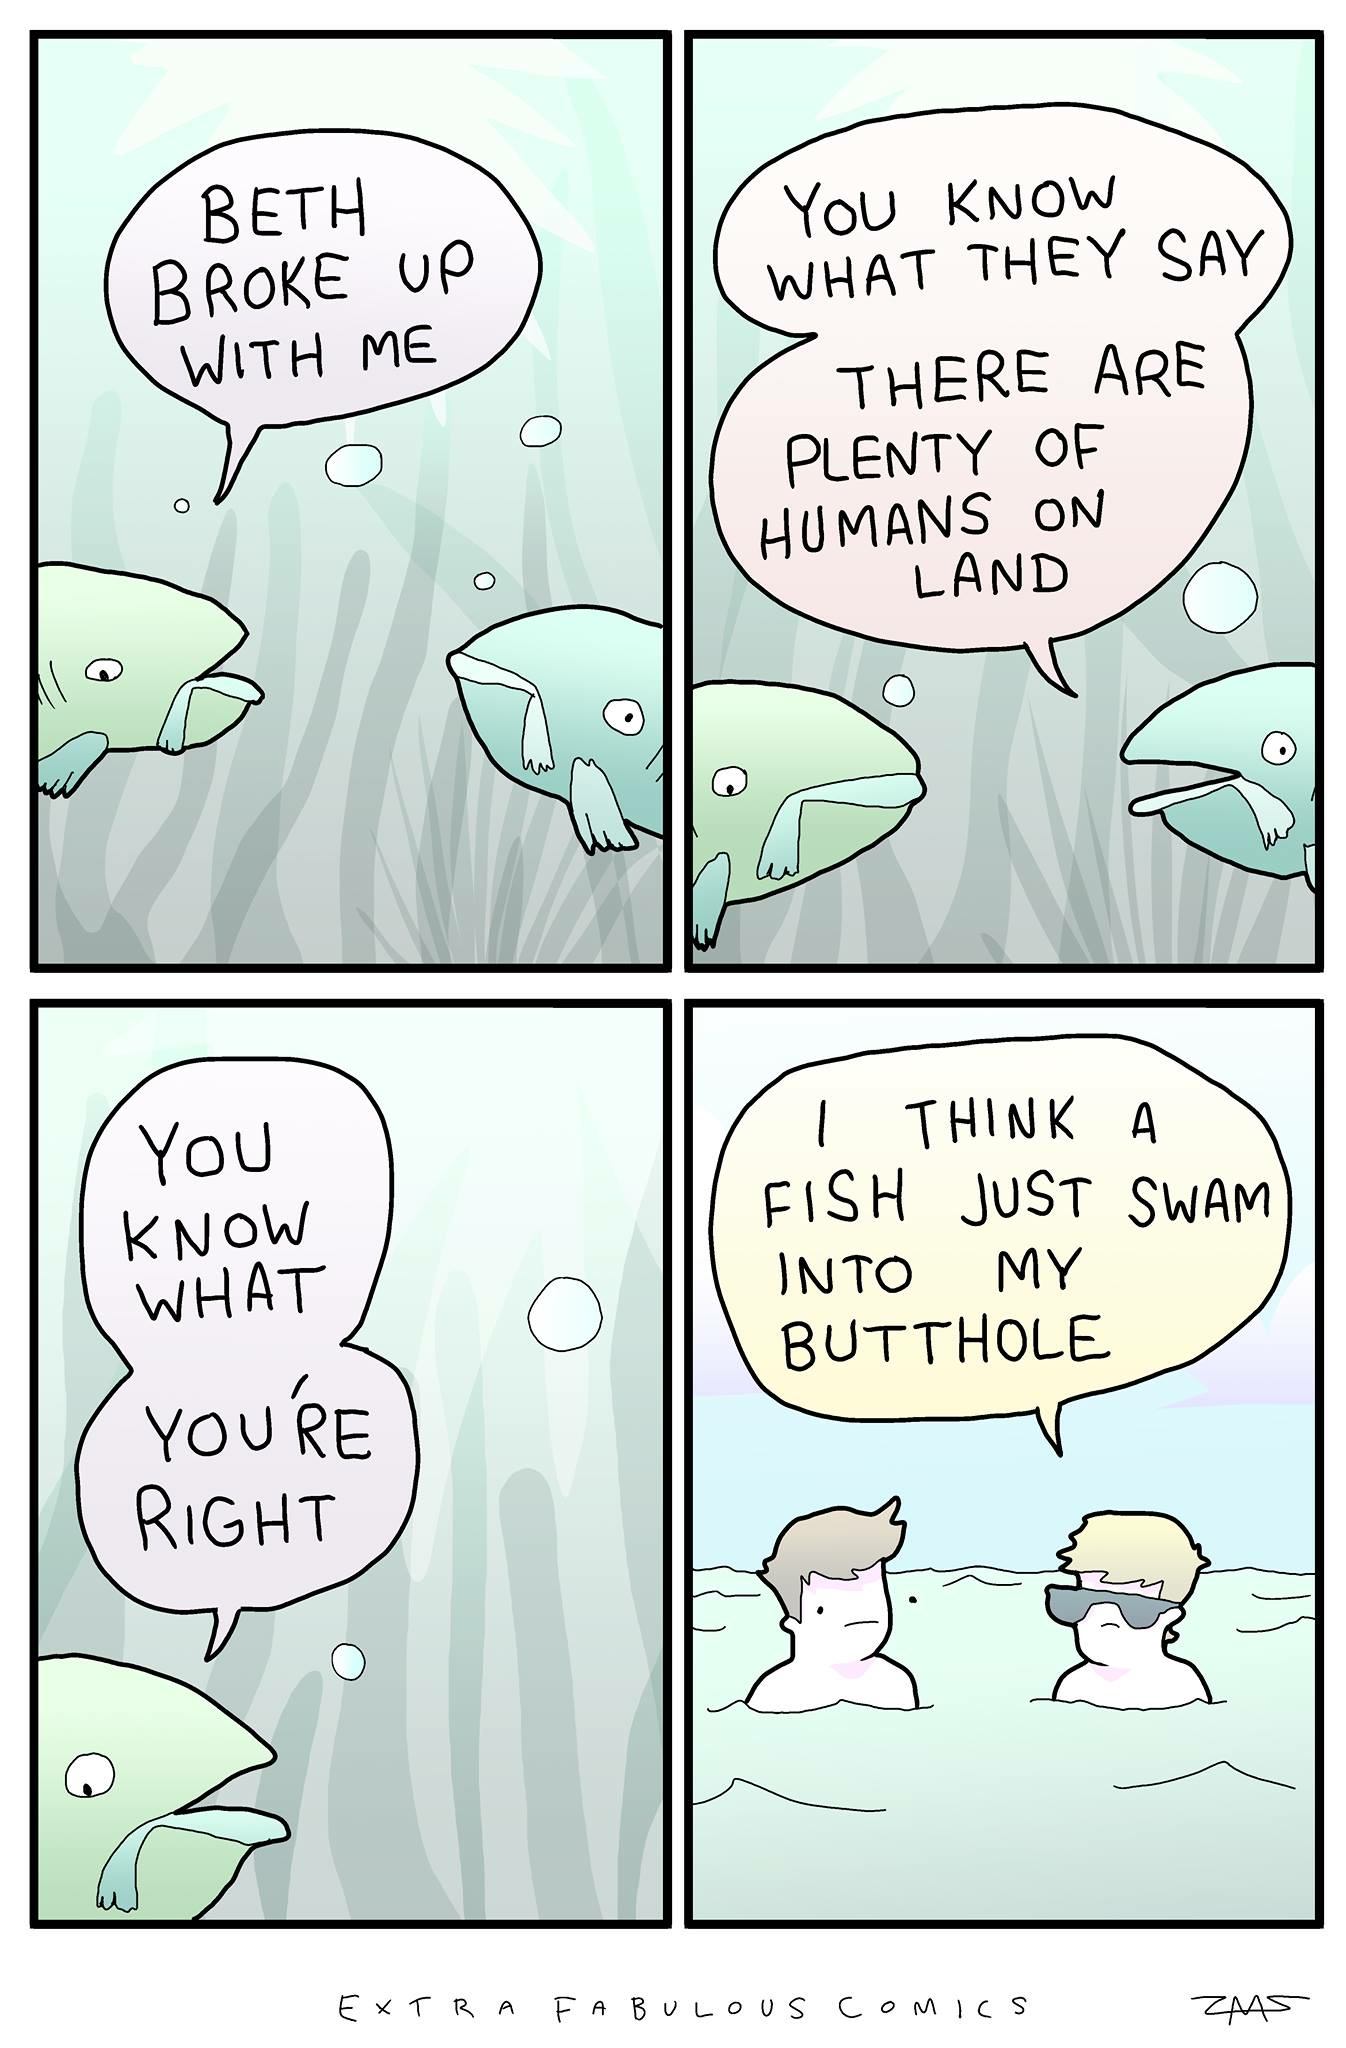 fish in the sea comic - Beth Broke Up With Me You Know What They Say There Are Plenty Of Humans On Land You Know What I Think A Fish Just Swam Into My Butthole Lo Youre Right Extra FABULOUs Comics Zms